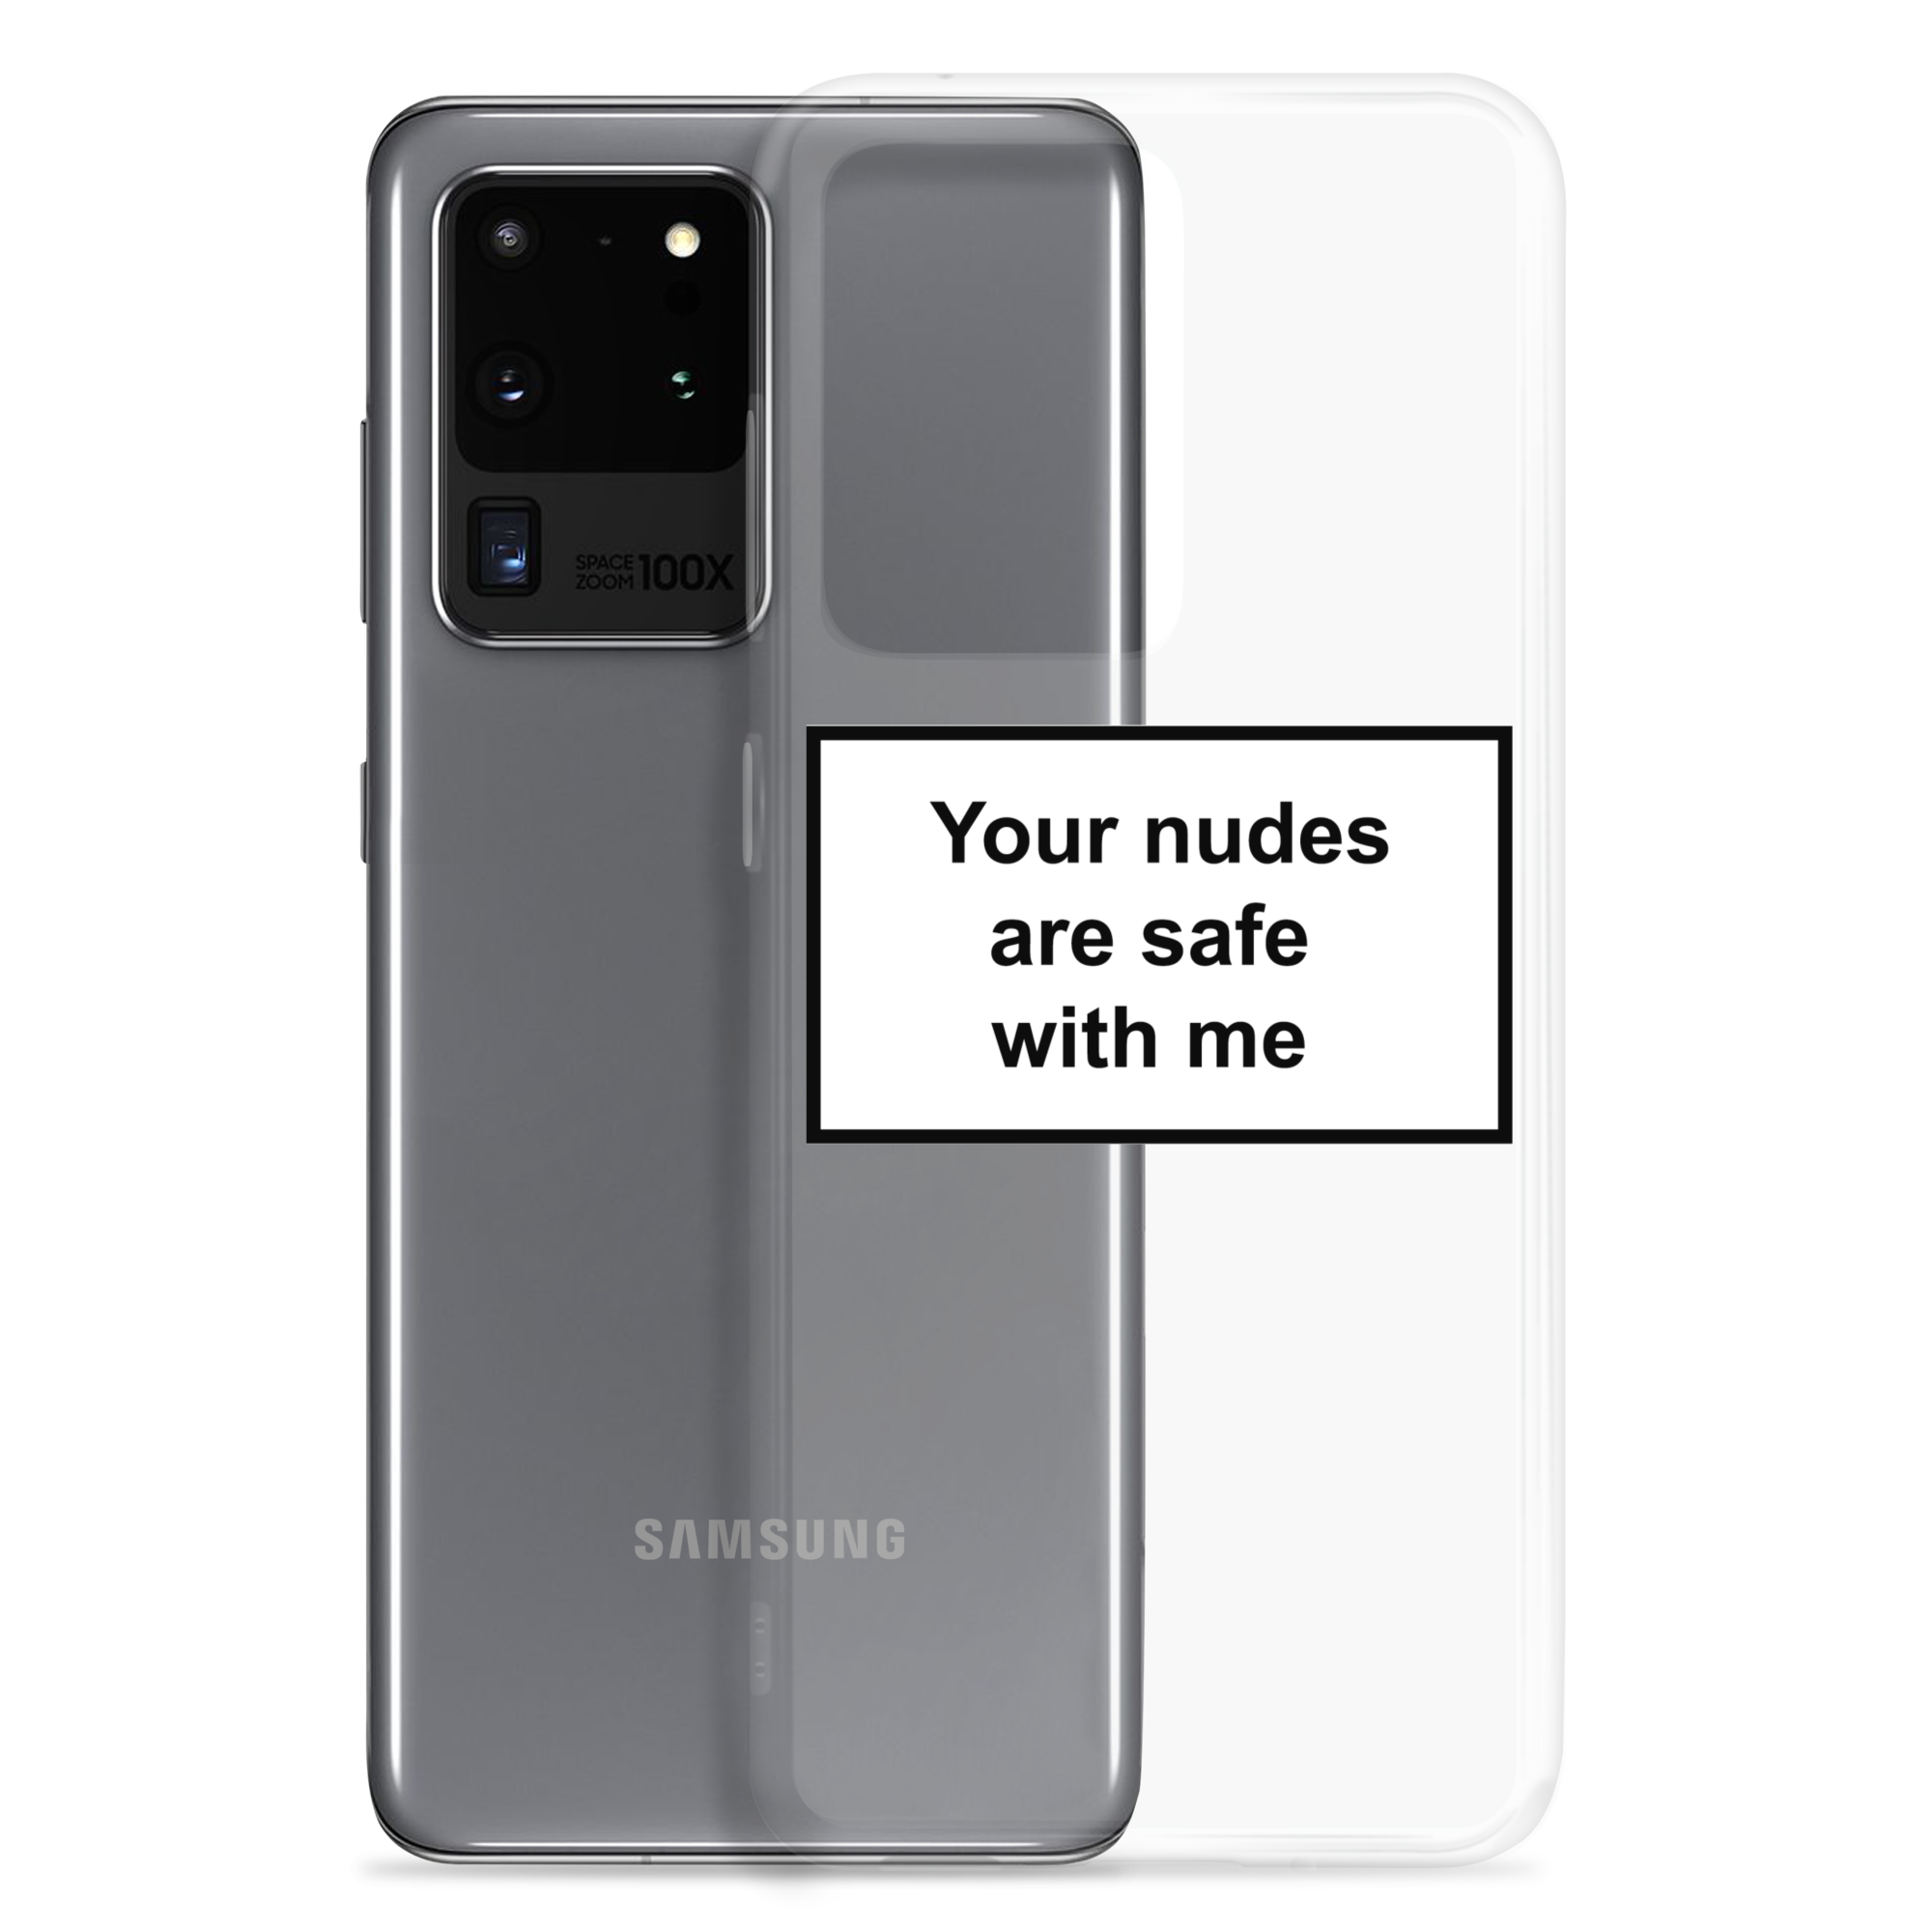 Your nudes are safe with me (phone case)